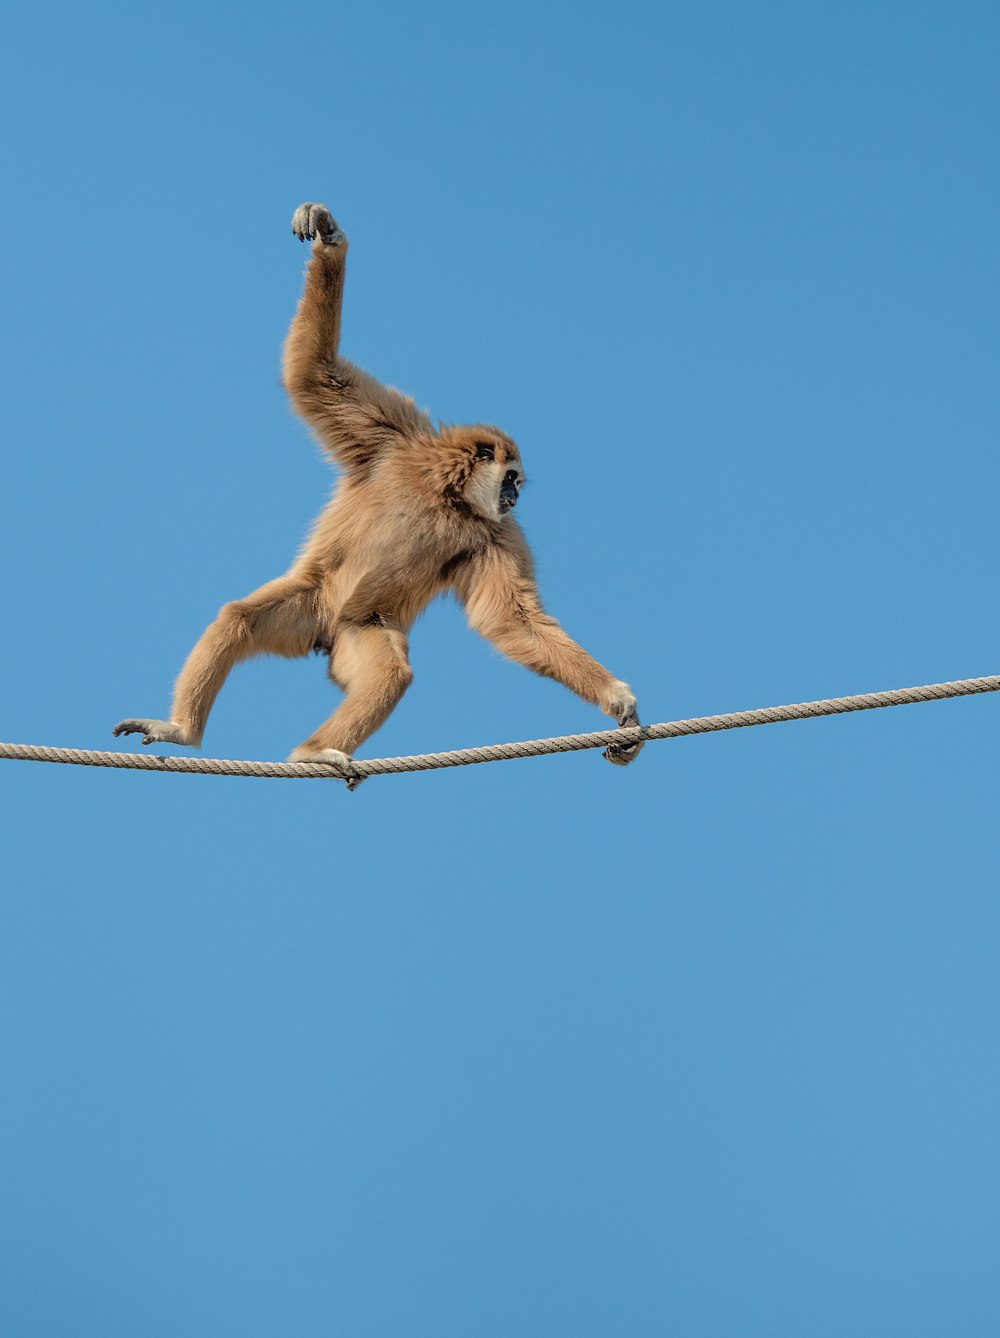 a monkey that is standing on a rope